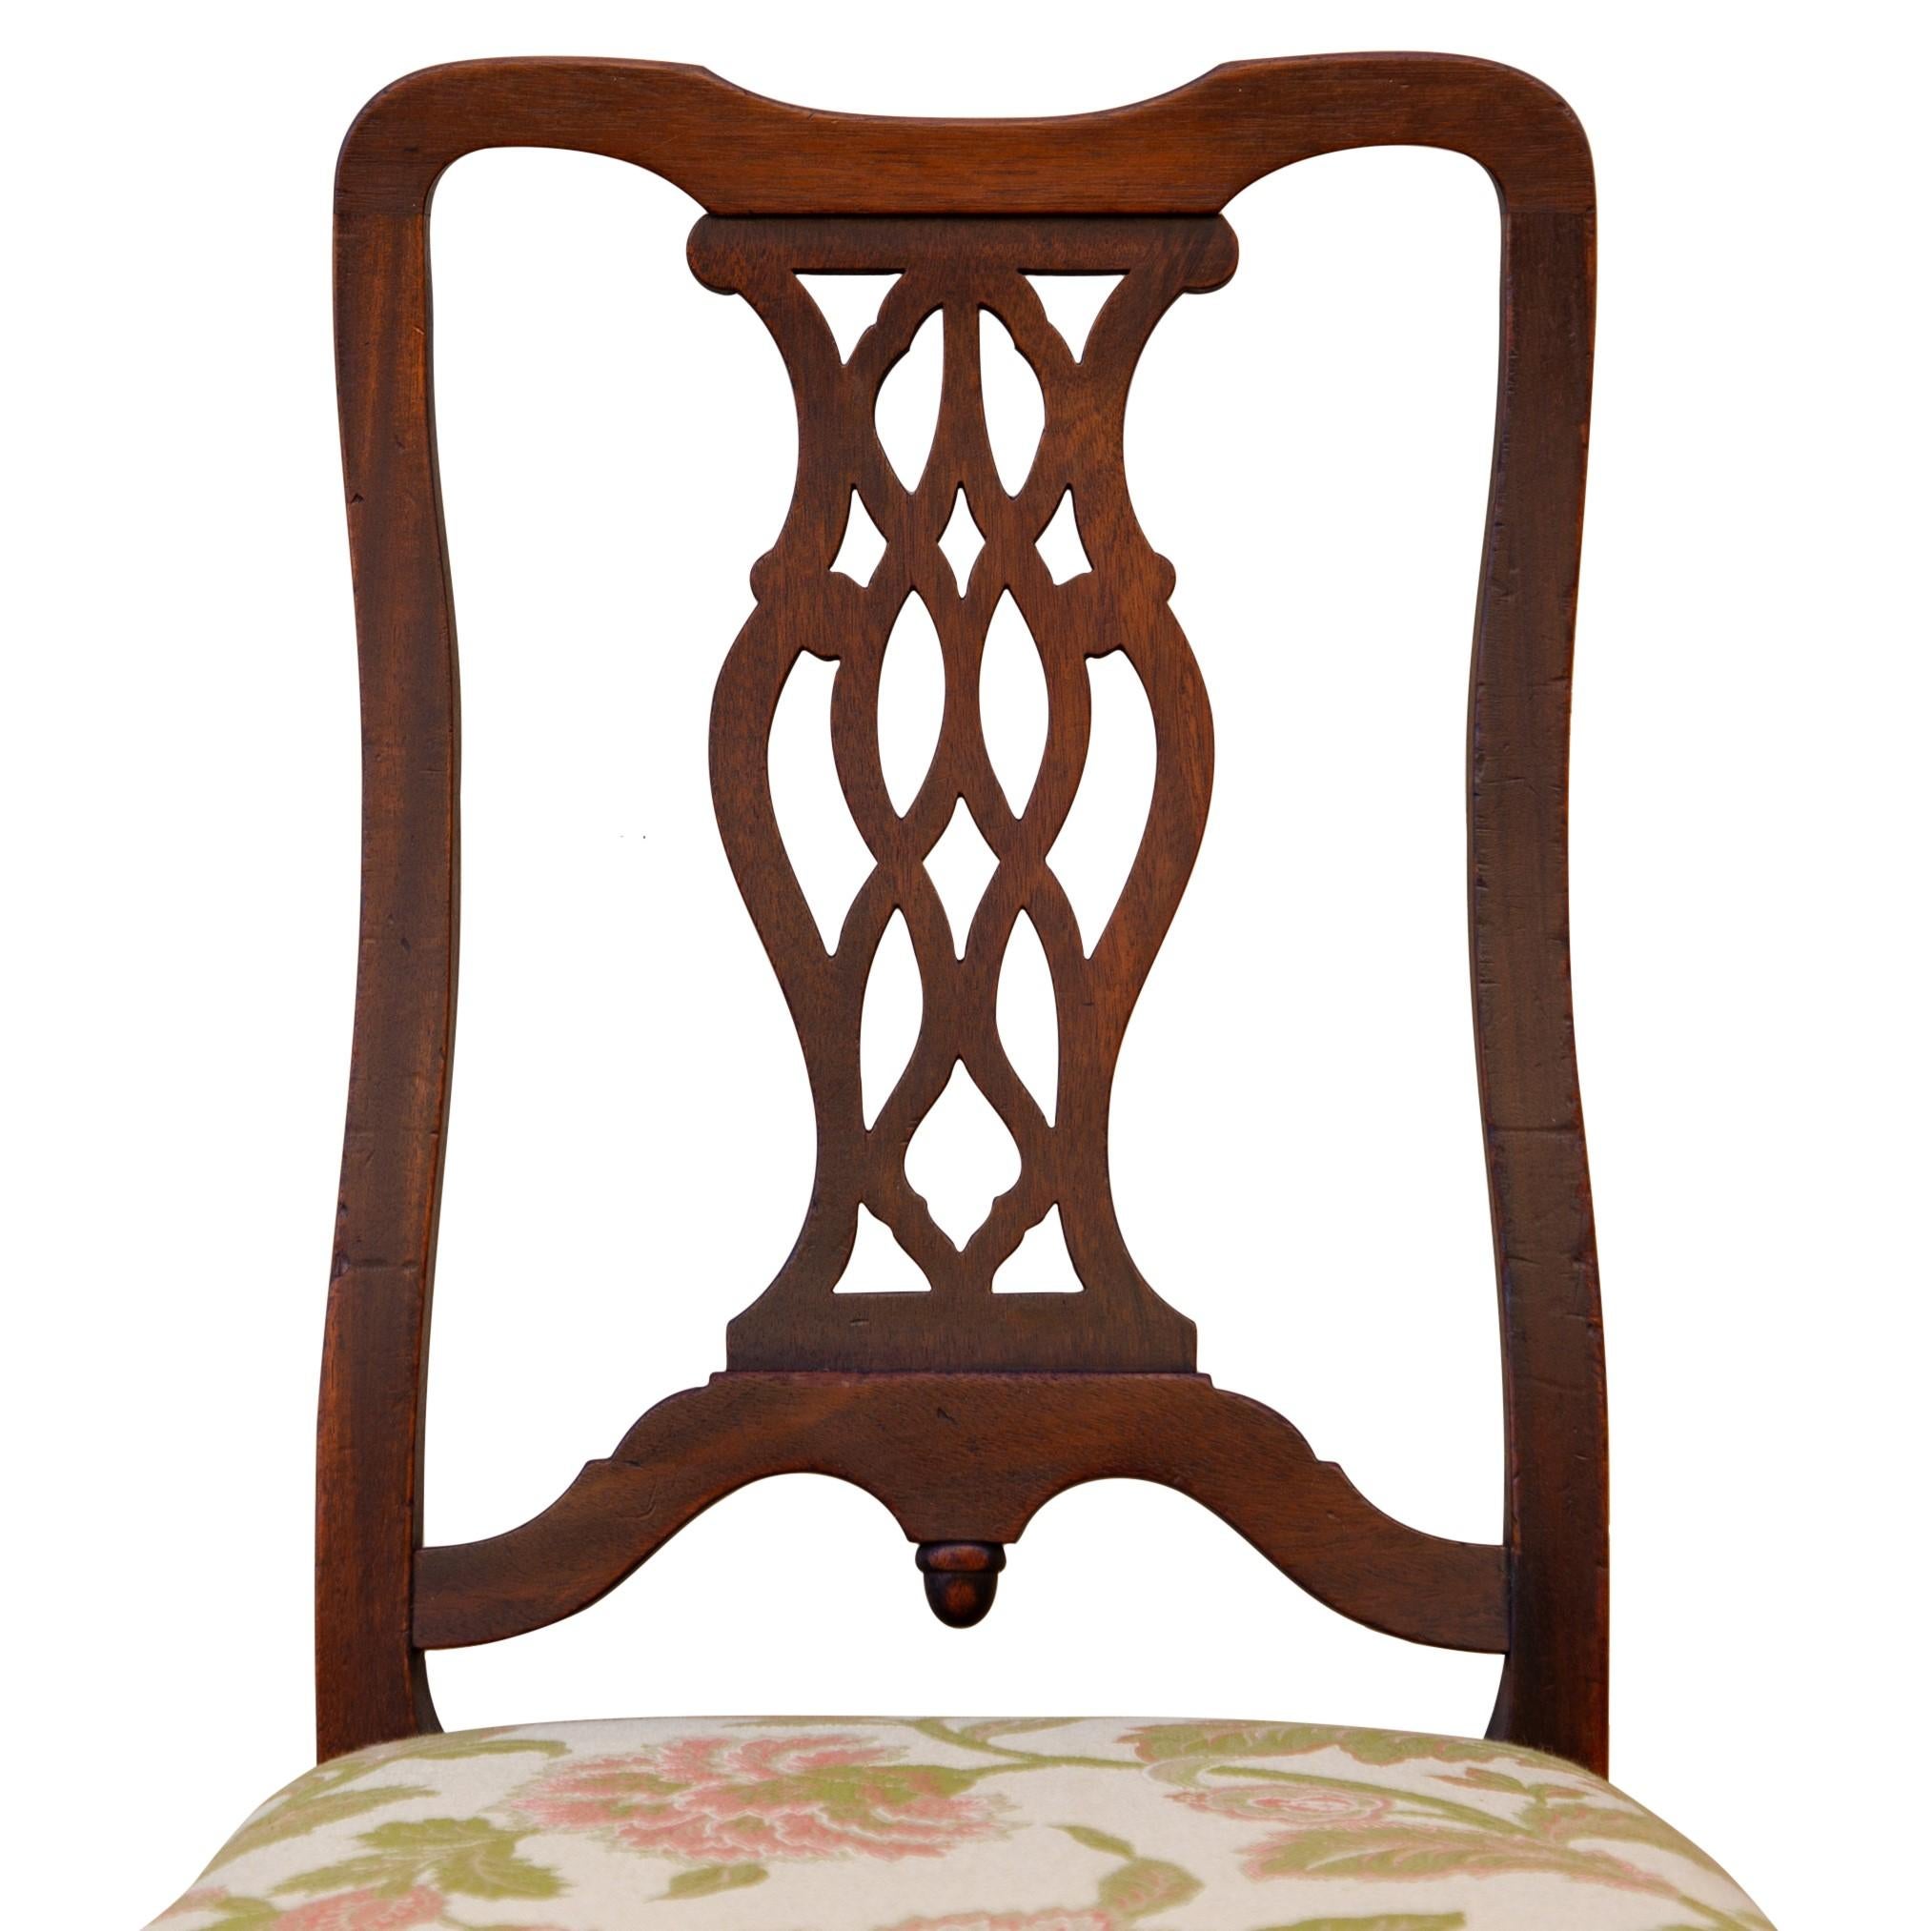 North American Early 20th C George II Style Carved Walnut Chair by Brower